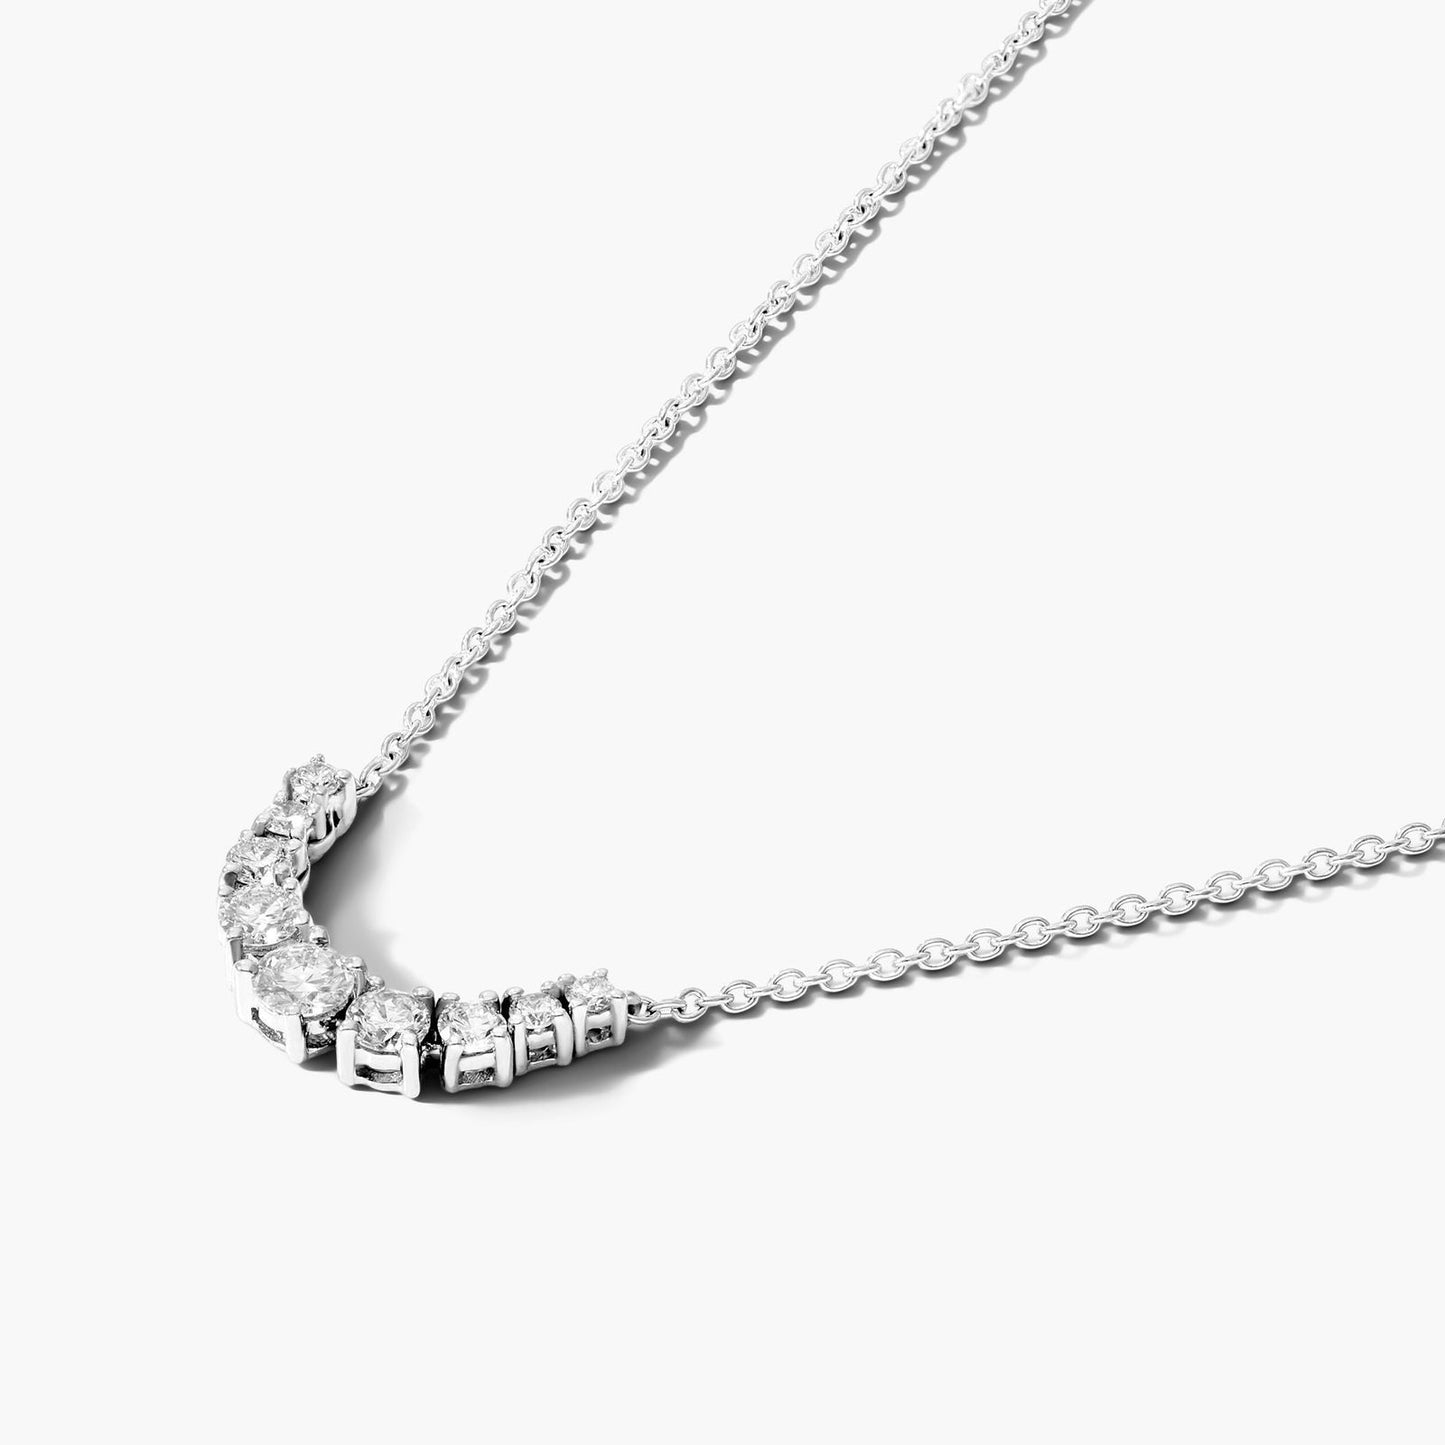 1.29 CT Round Diamond Necklace for Women